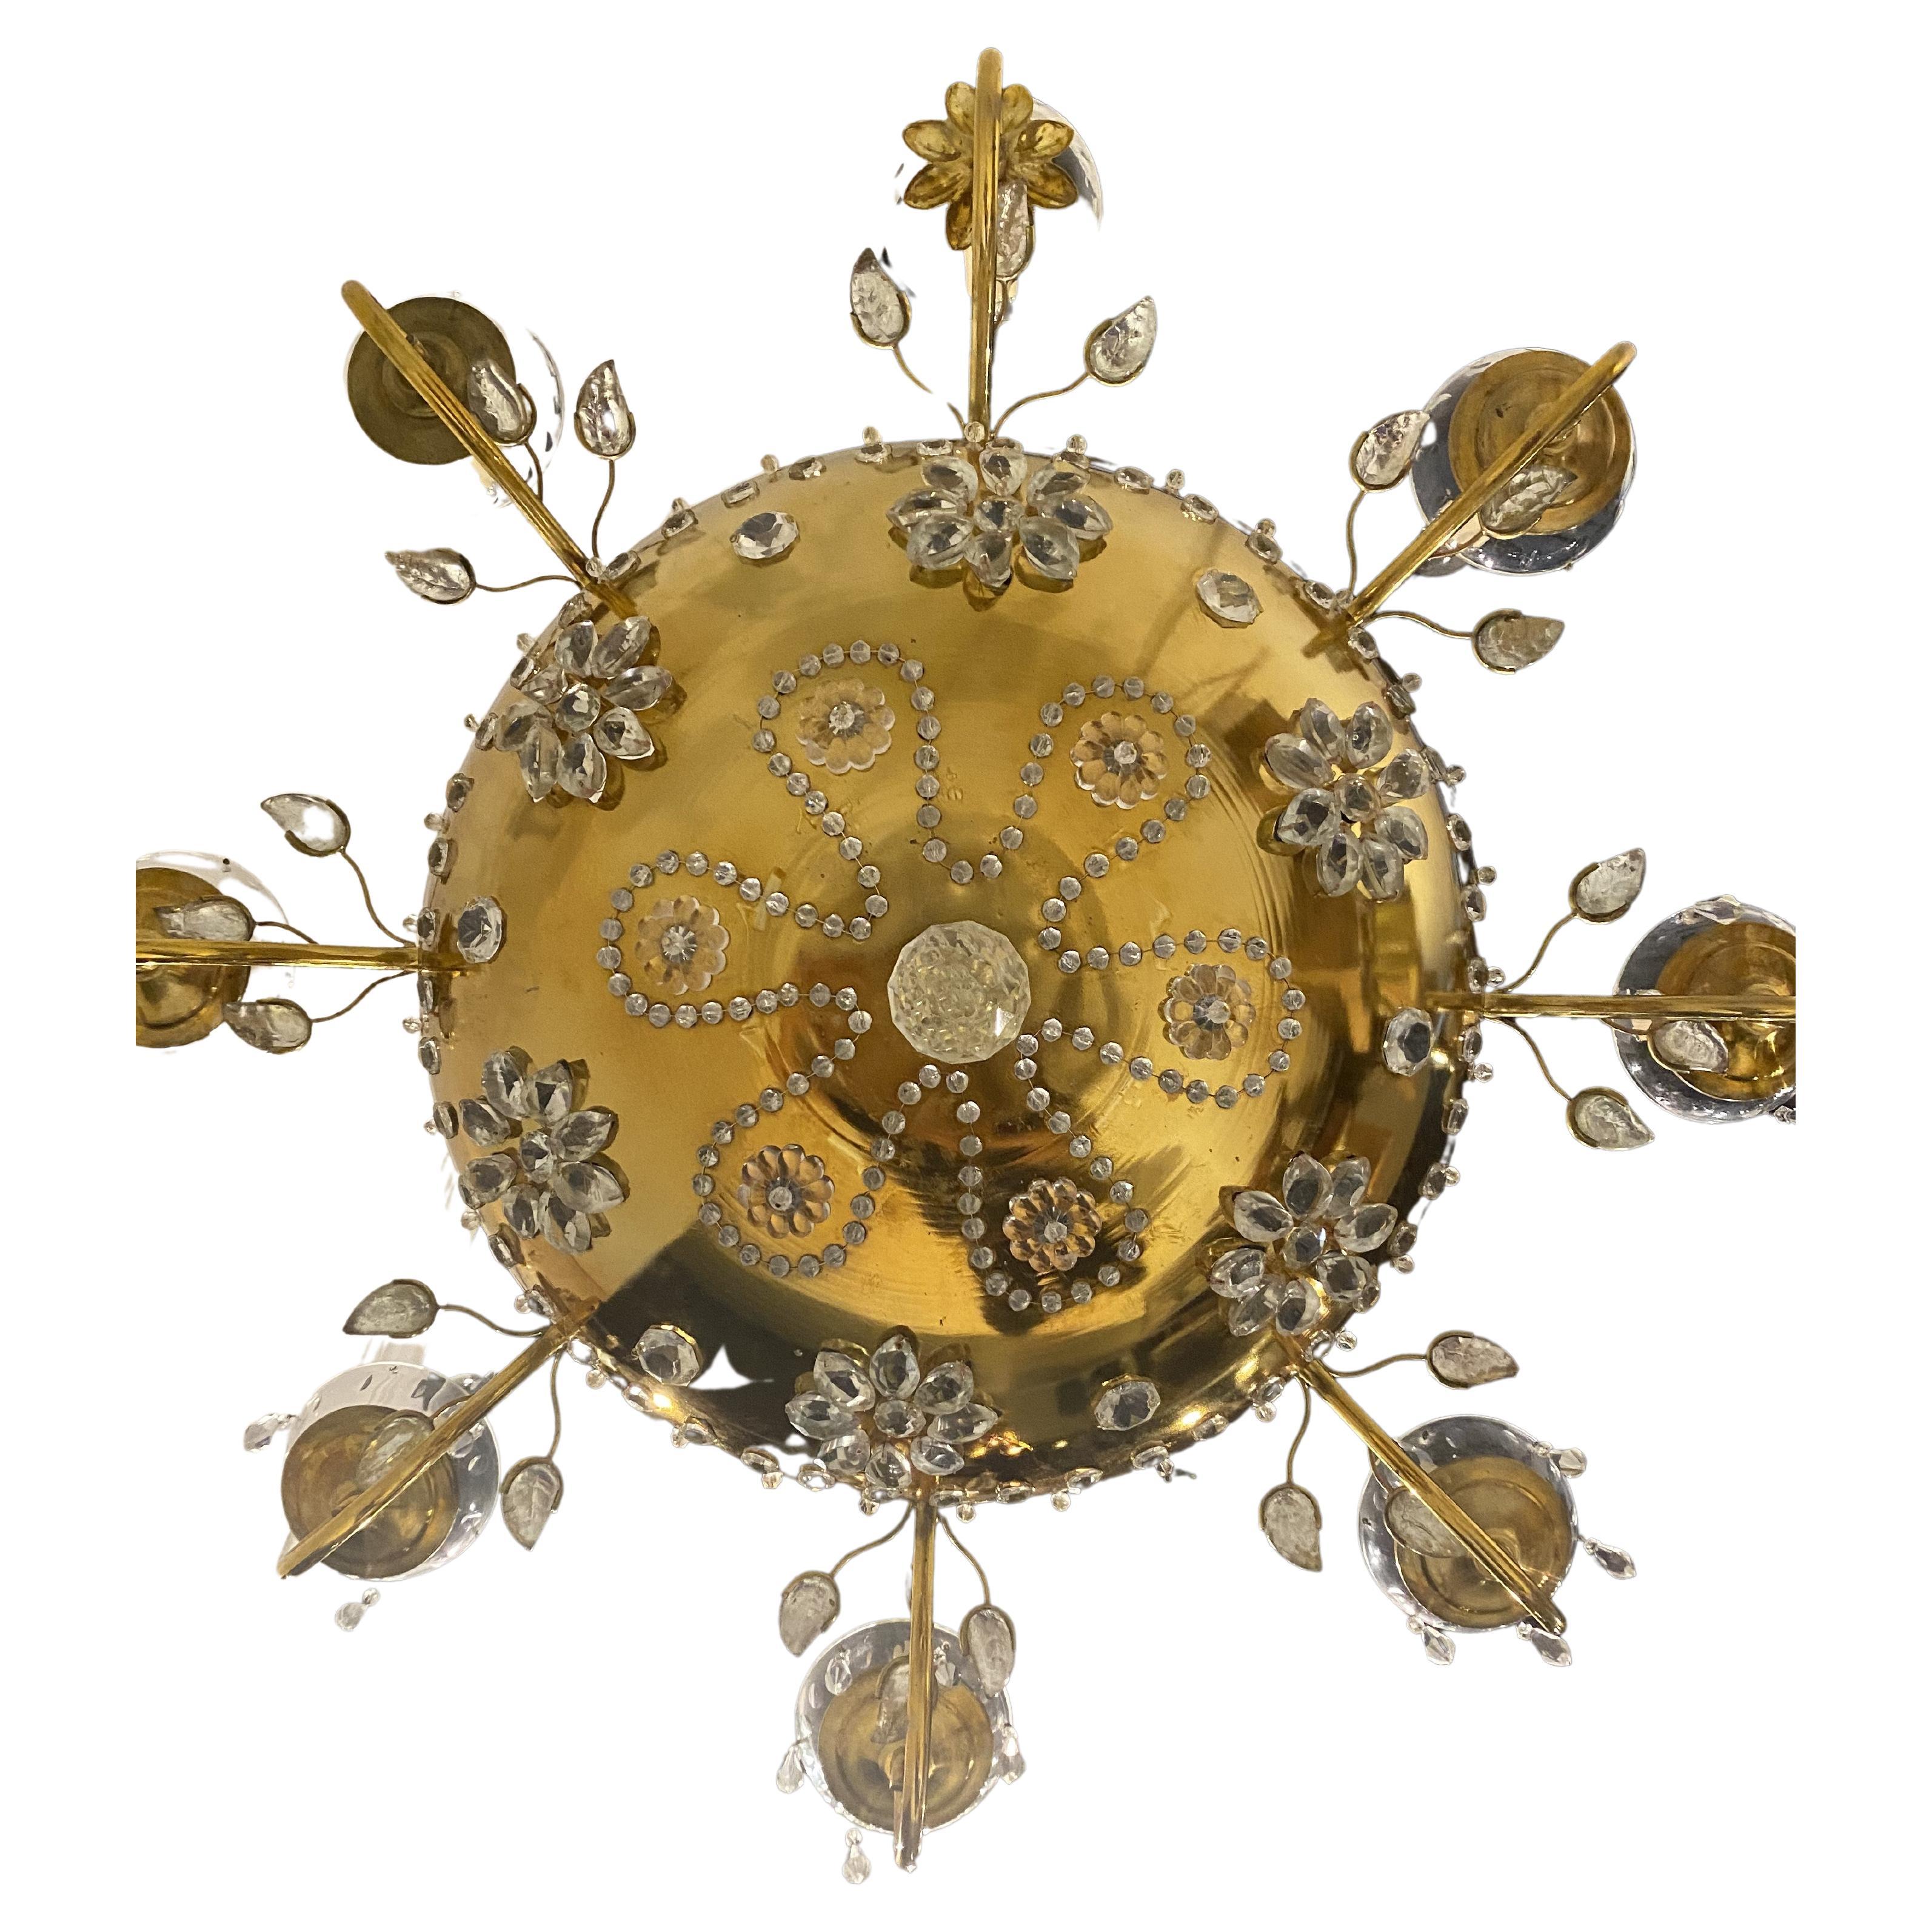 A circa 1930's French gilt bronze chandelier with beaded crystal flowers on body. Available pair 